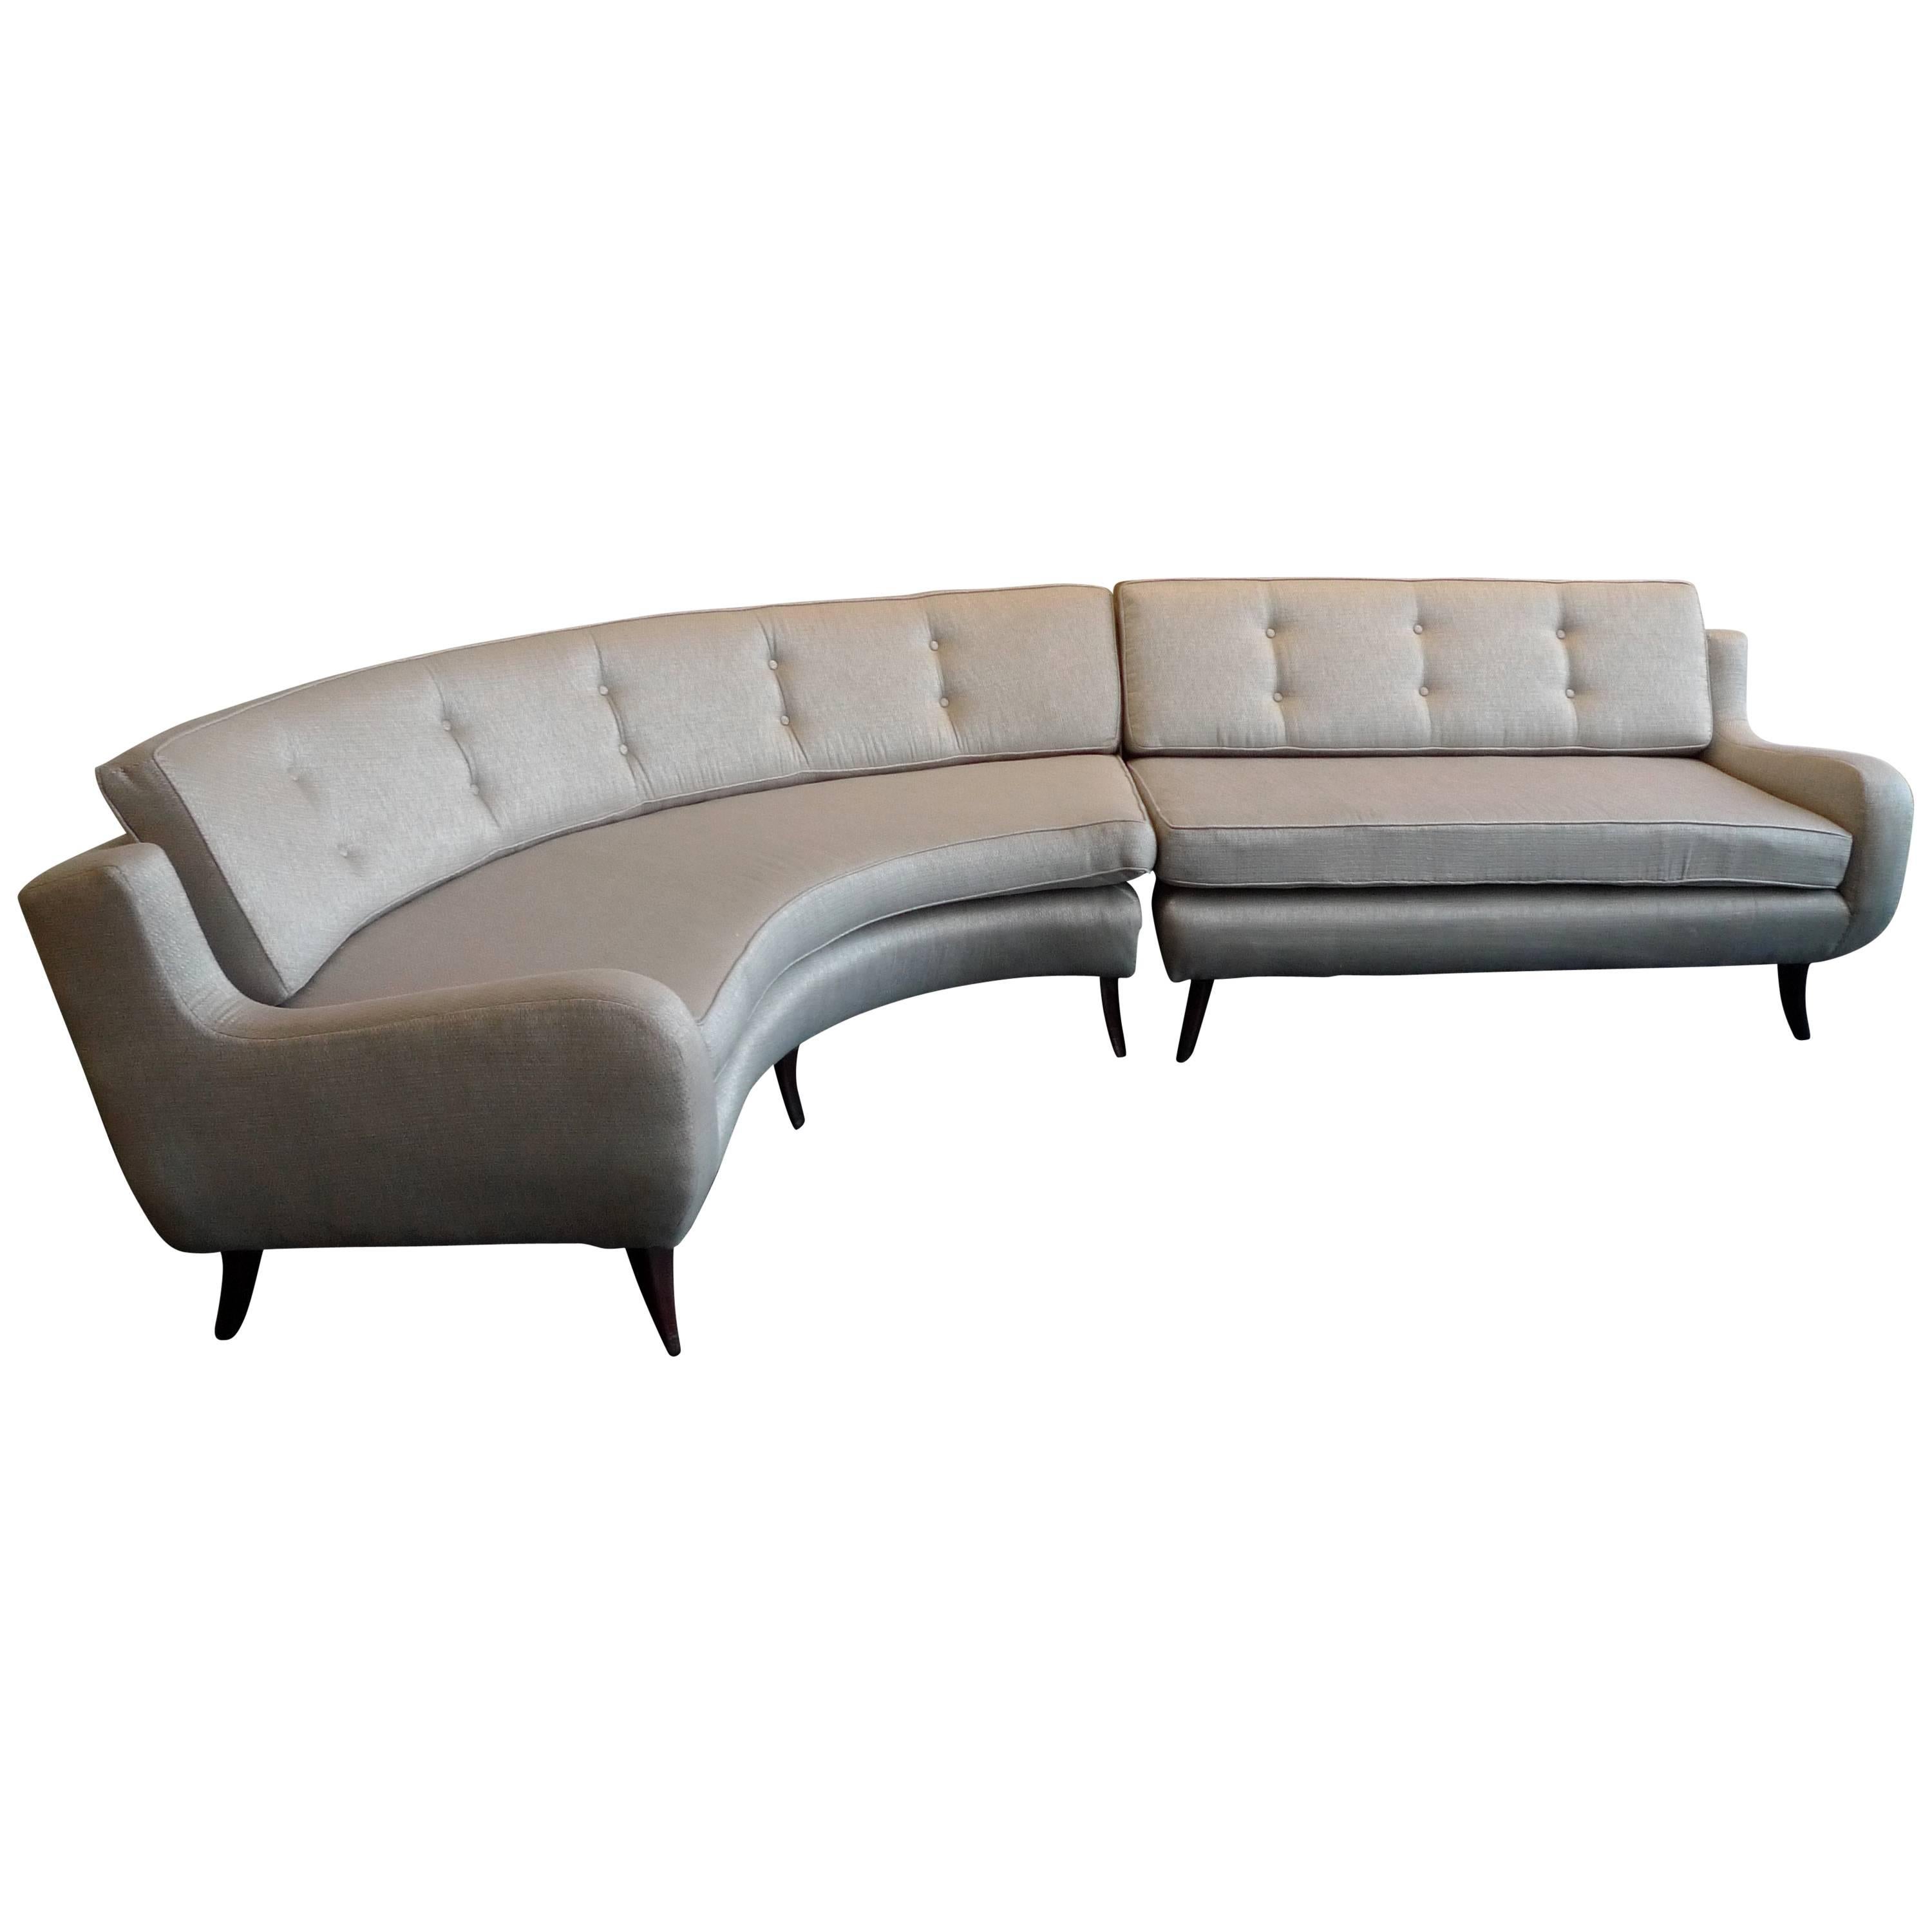 Rare Mid-Century Modern Two-Piece Sectional Sofa by Ernst Schwadron